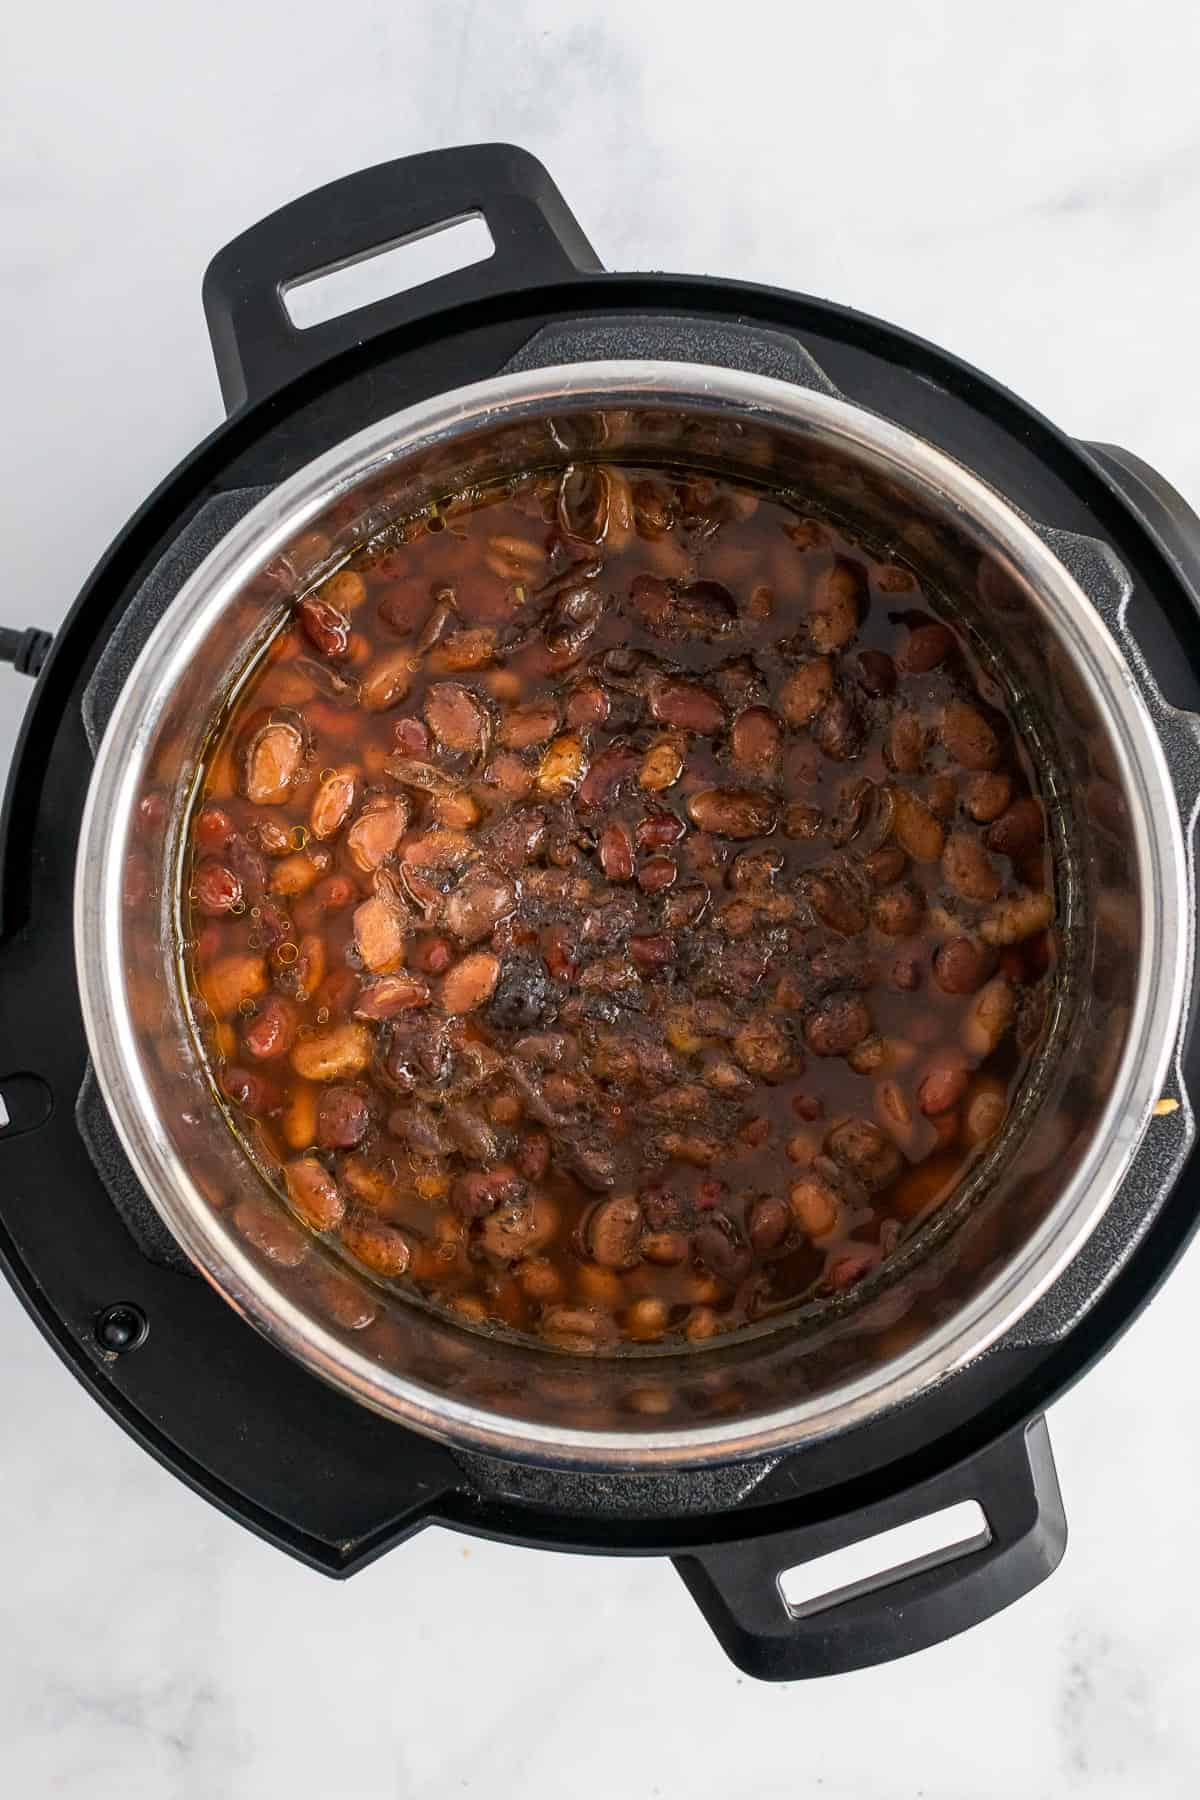 Cooked beans in the instant pot, seen from above